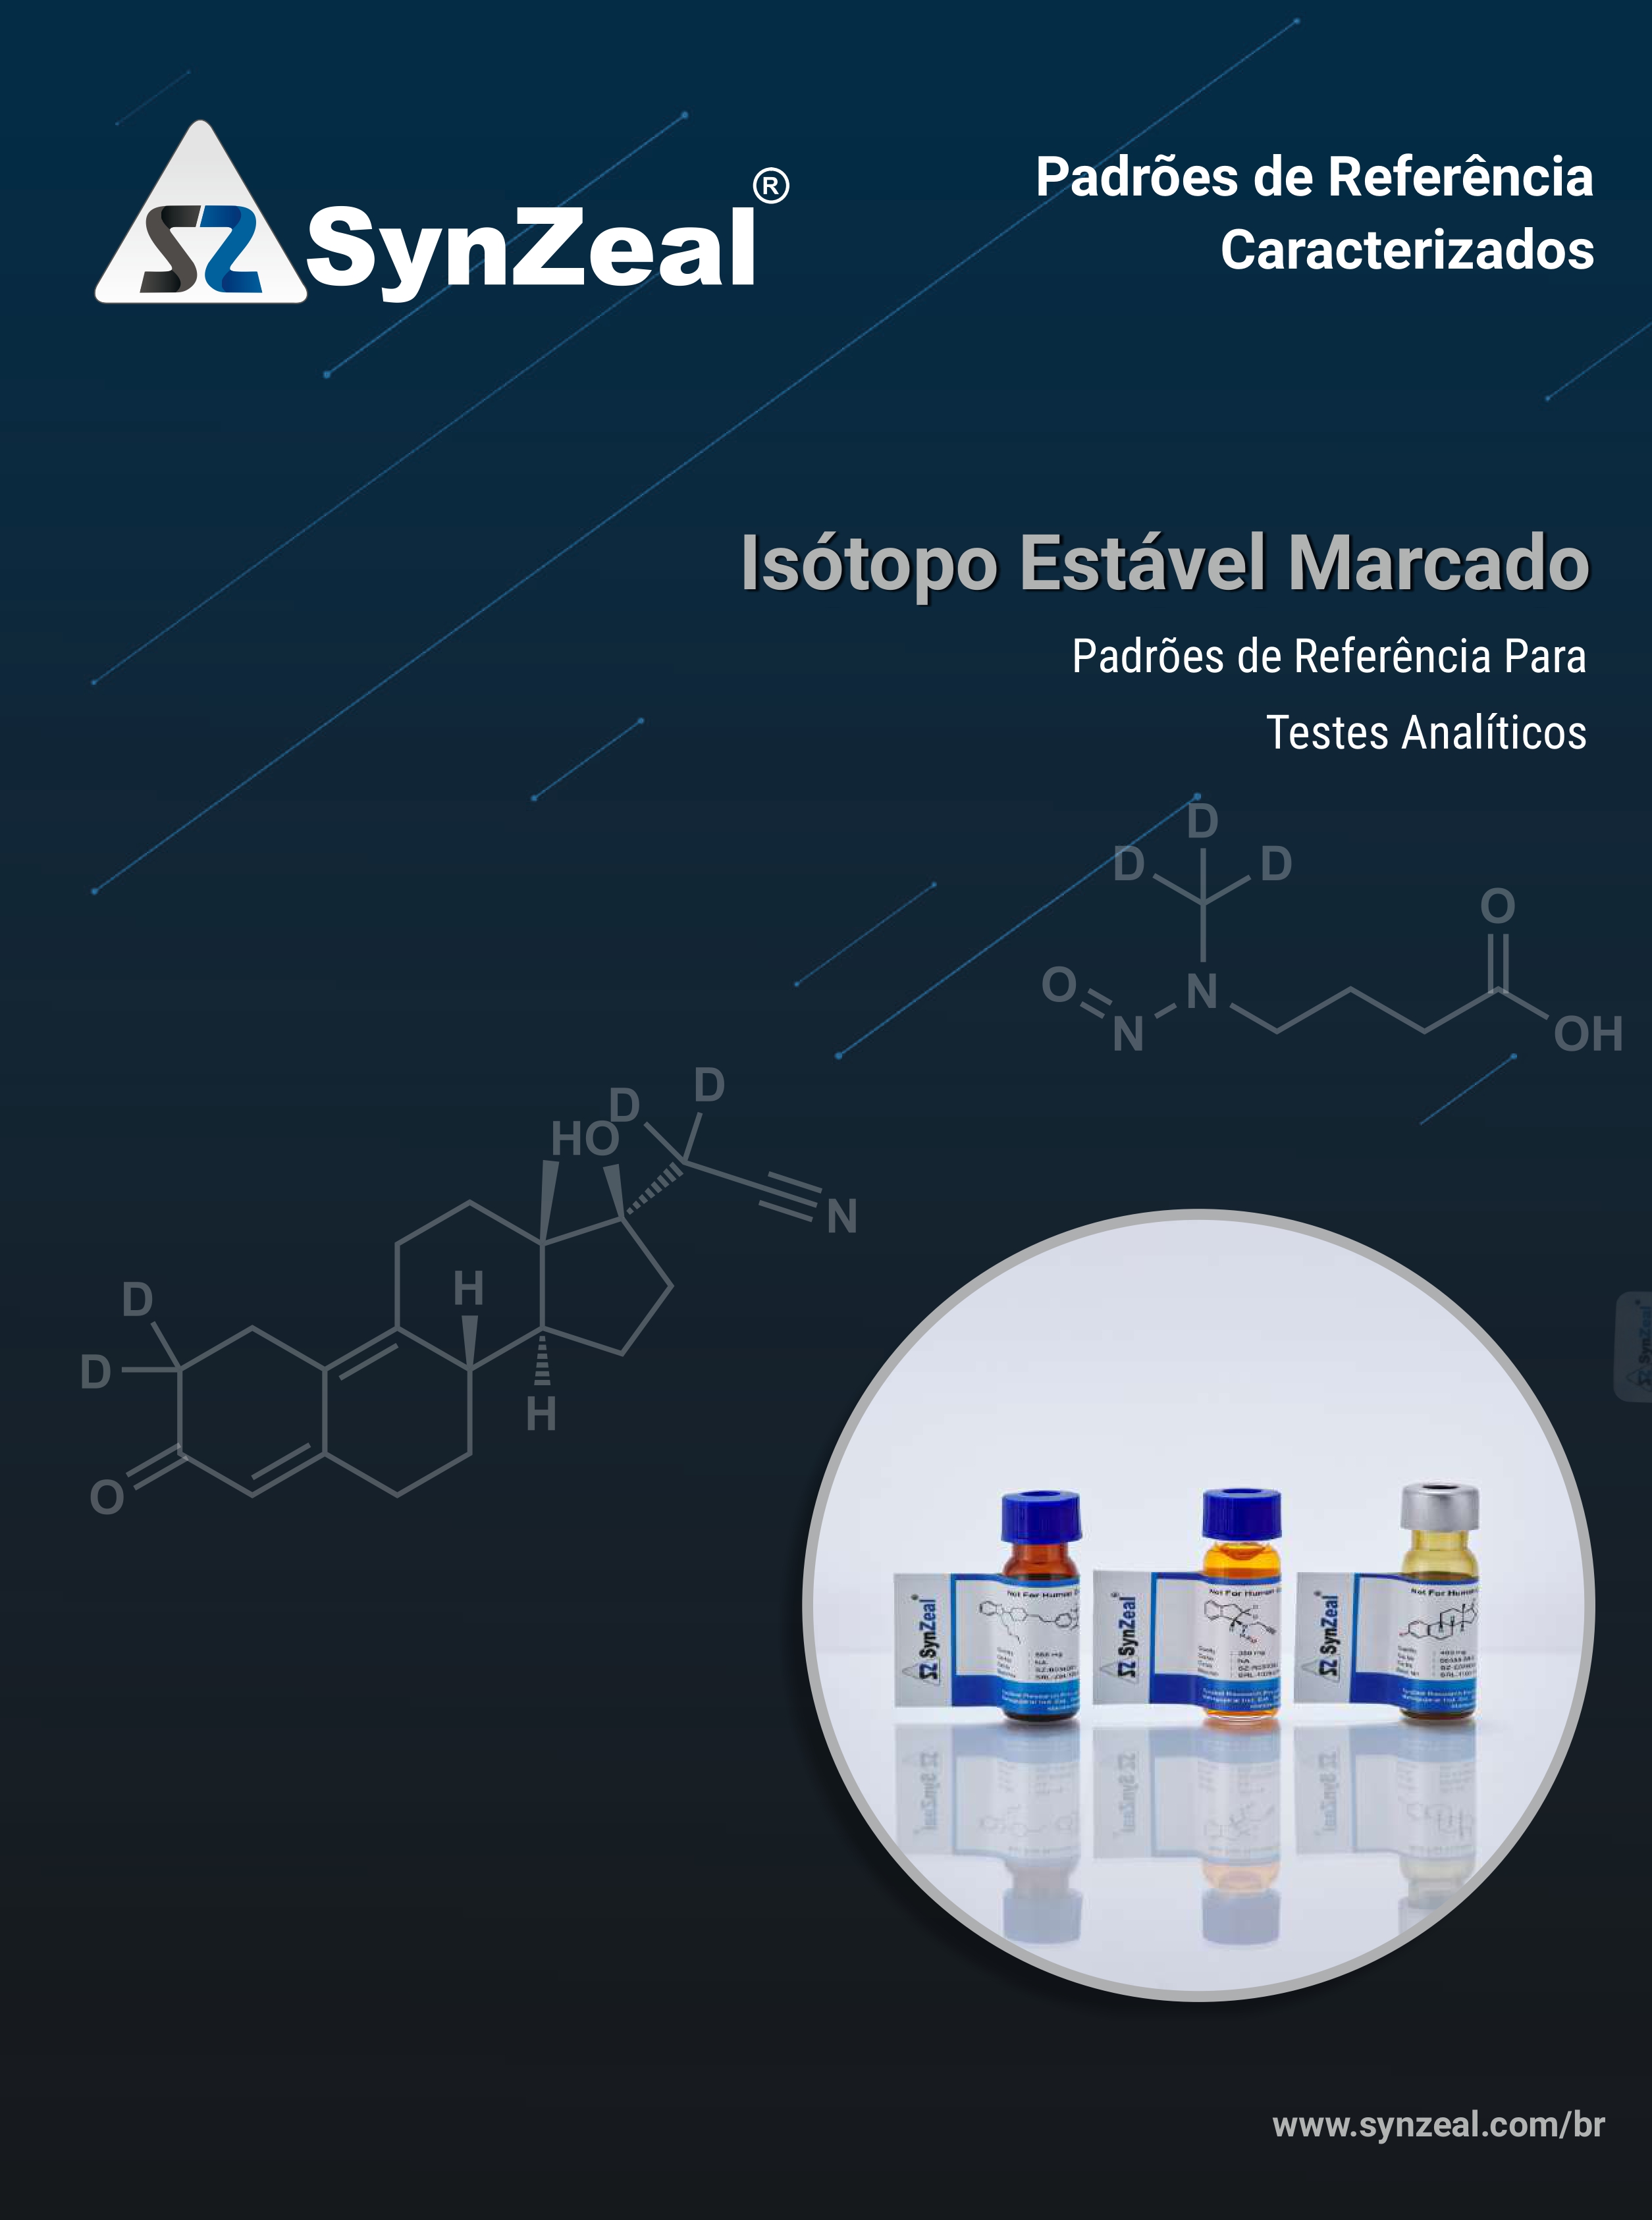 aPortuguese_isotop brochure.jpg